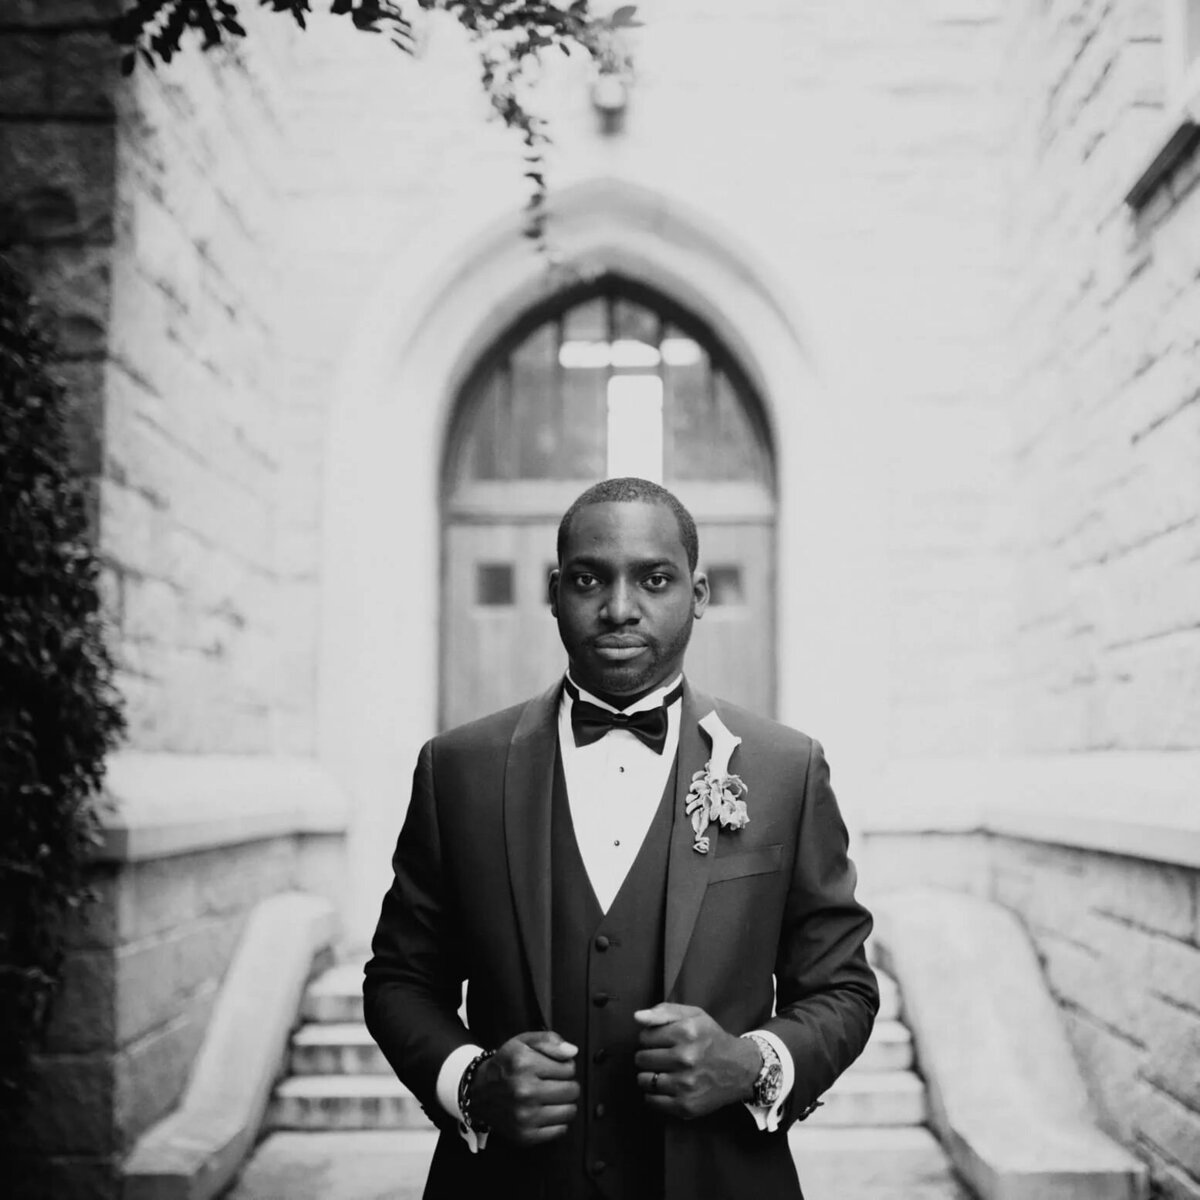 A groom in a black tuxedo stands confidently outside a stone building, his expression serious and poised.